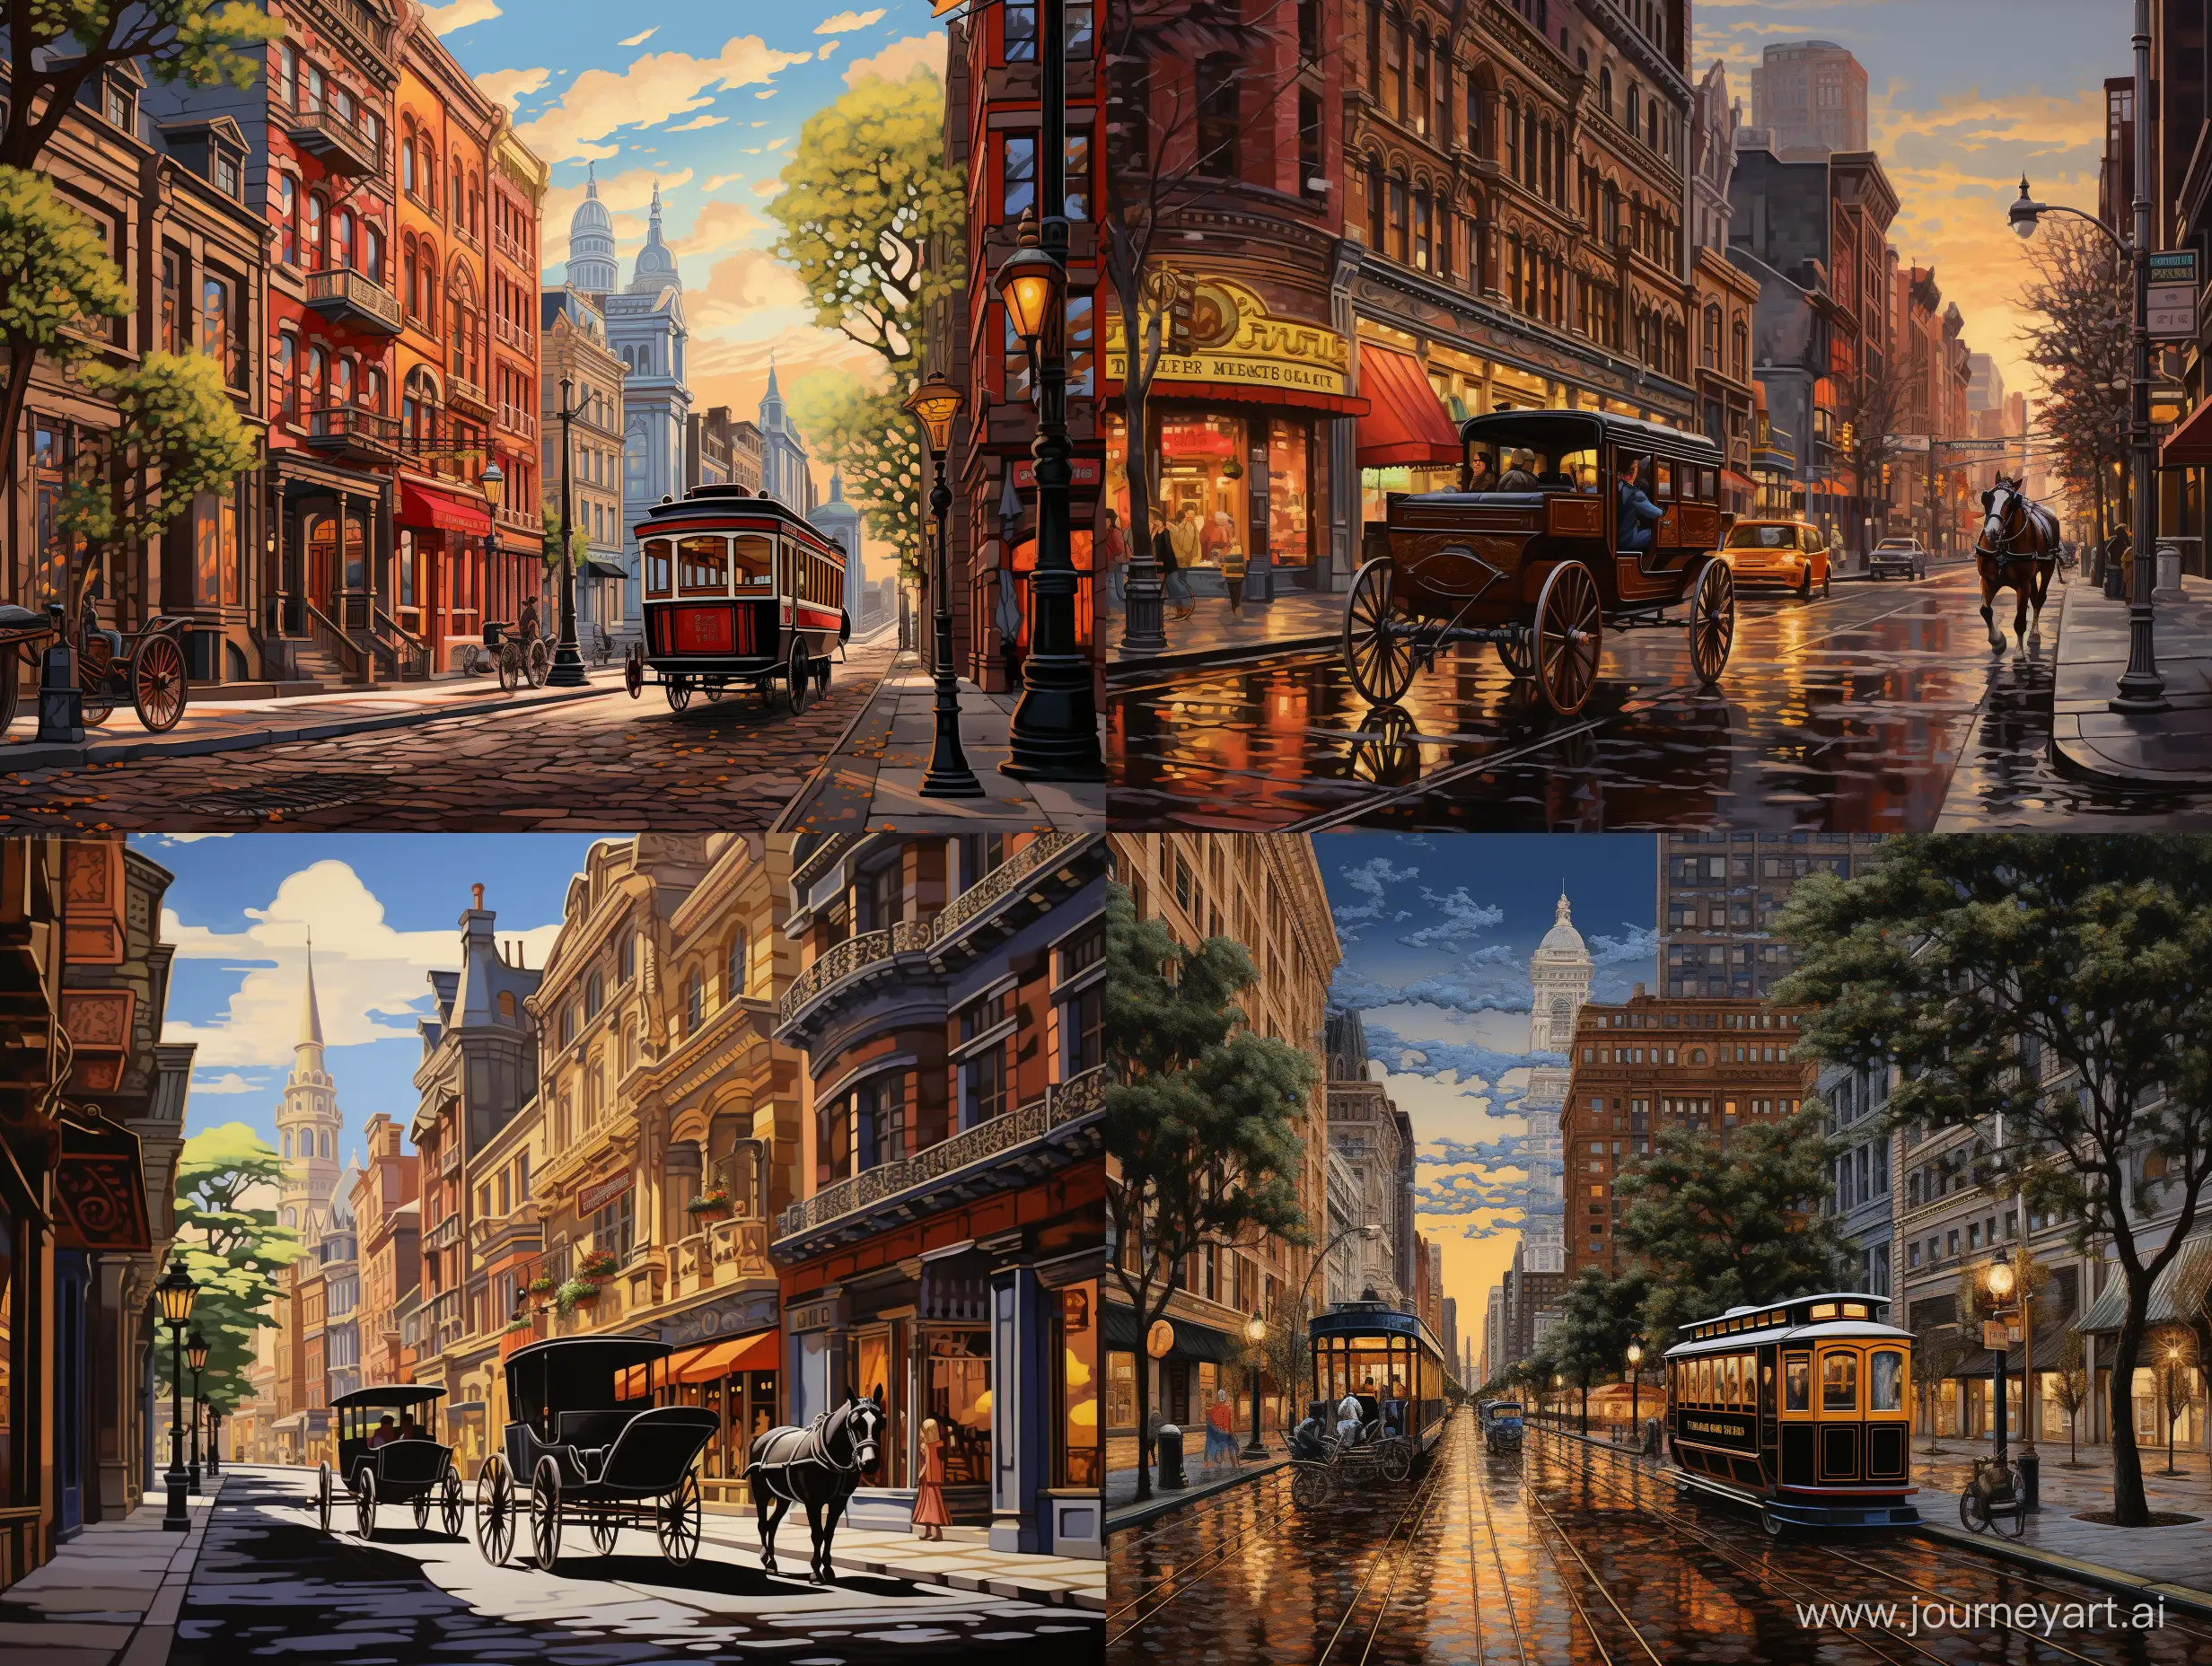 City-Street-Painting-with-Elegant-HorseDrawn-Carriage